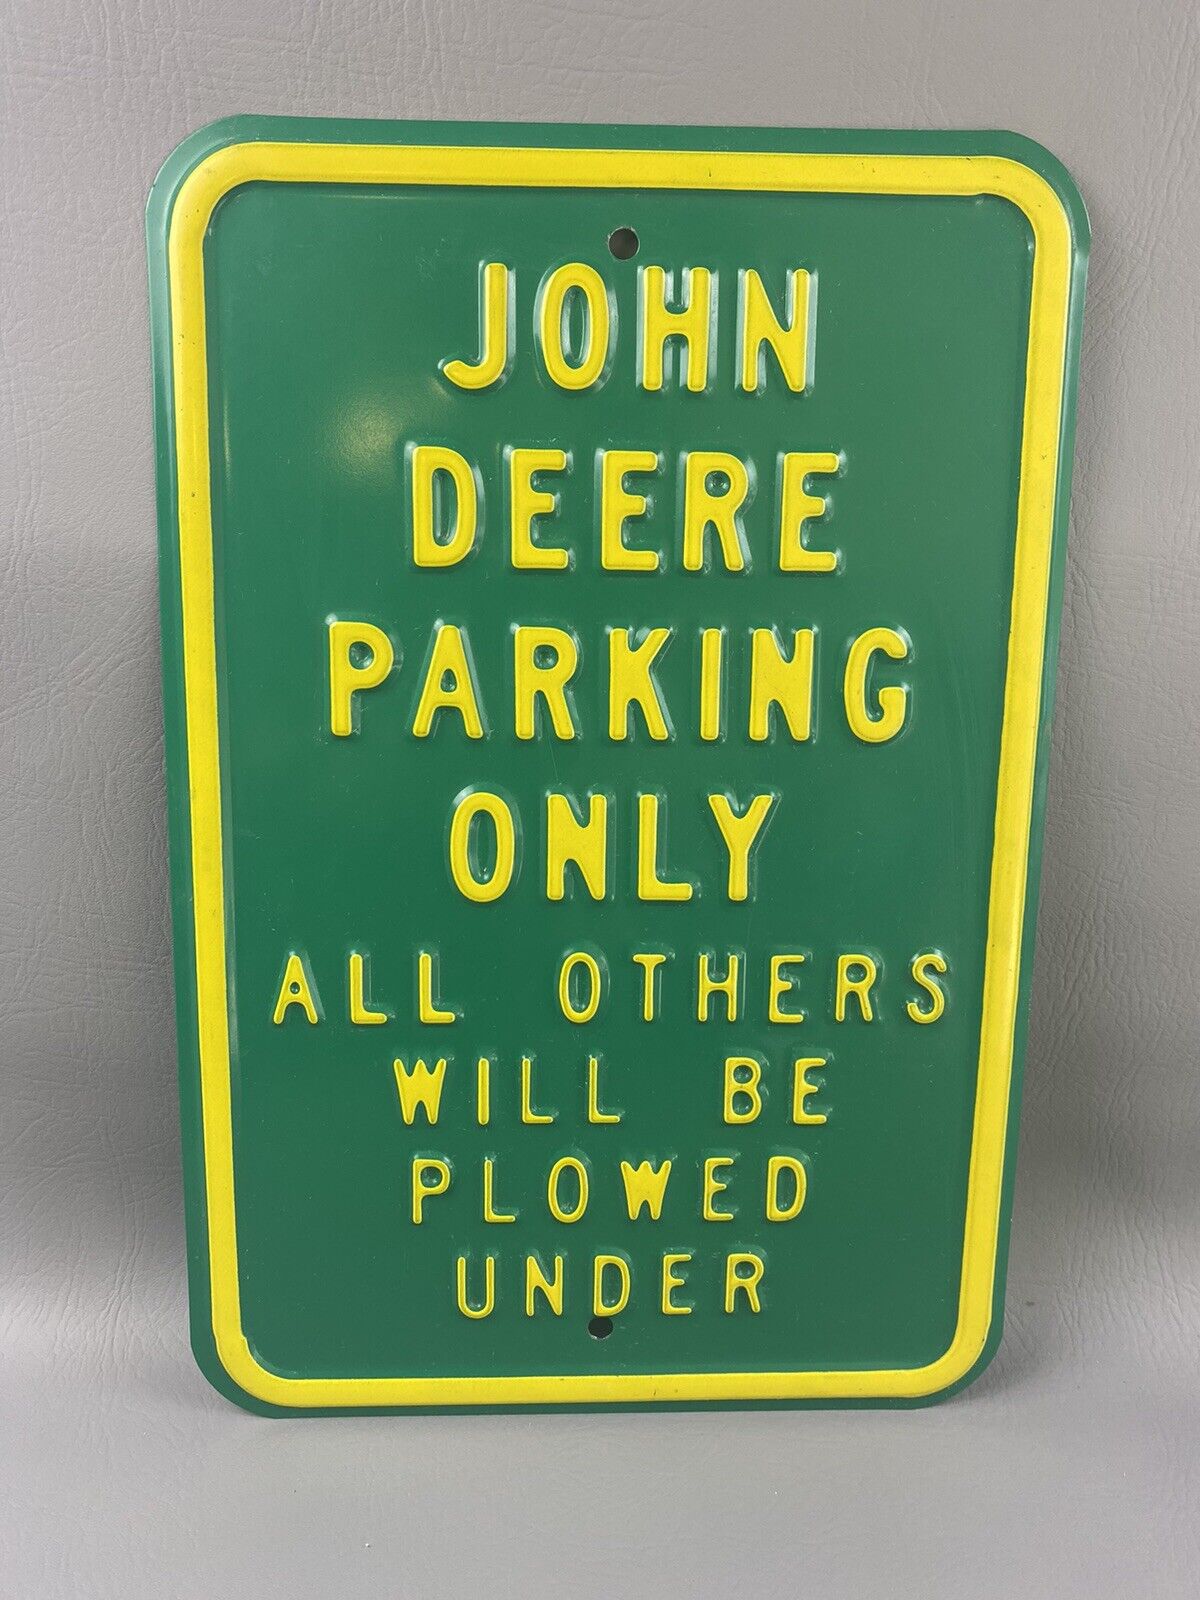 John Deere Parking Only -All Others Will Be Plowed Under - Embossed Steel Sign